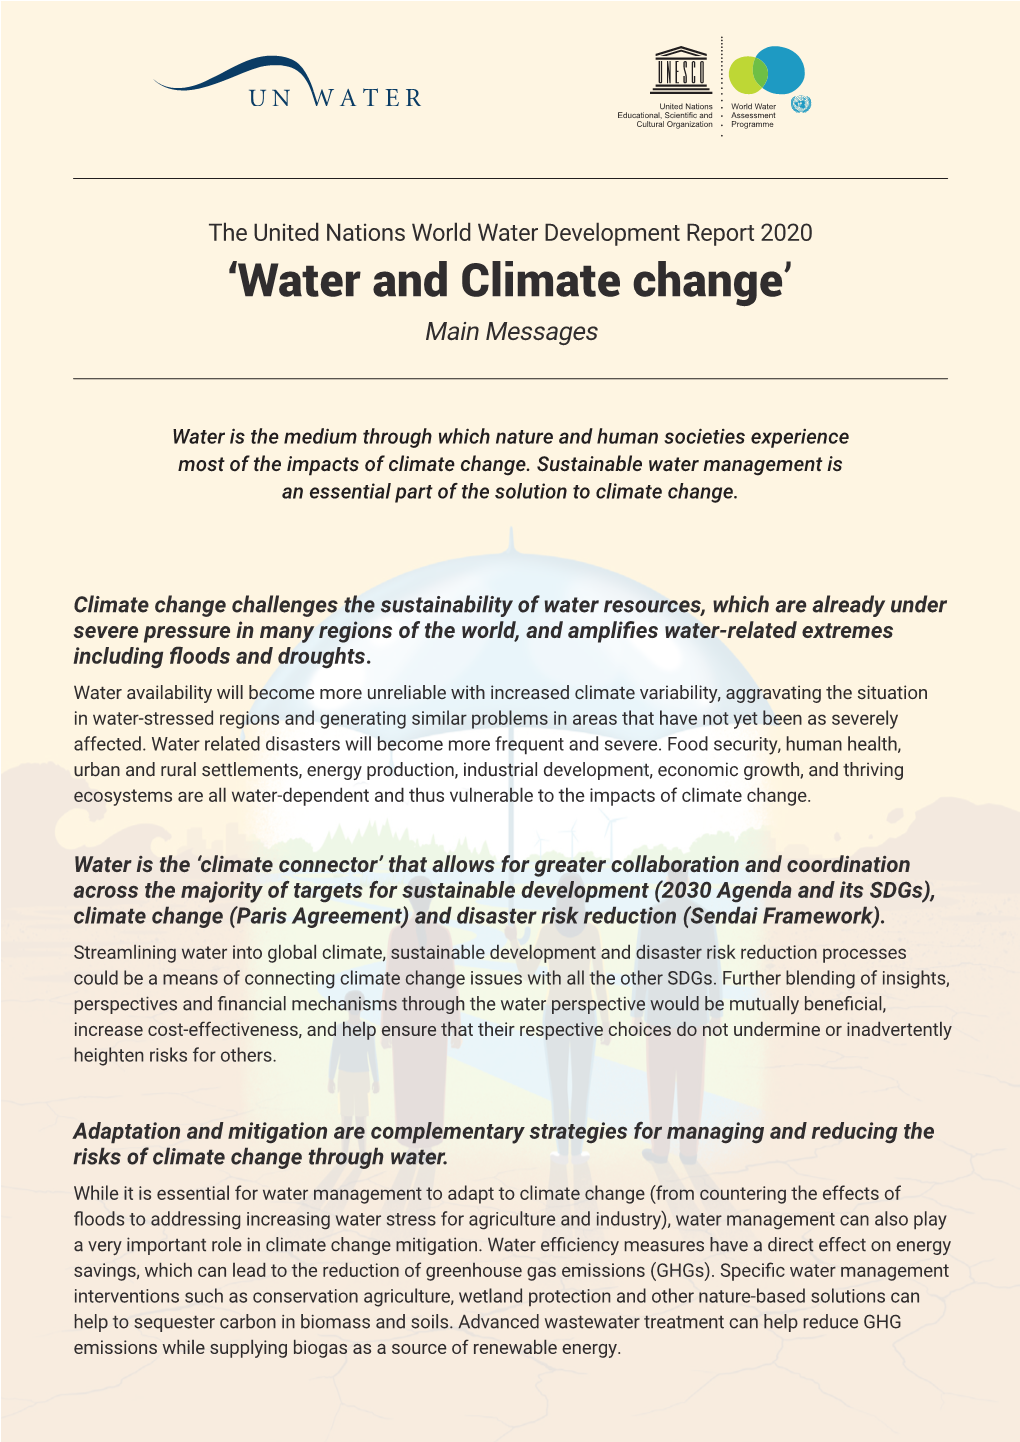 'Water and Climate Change'